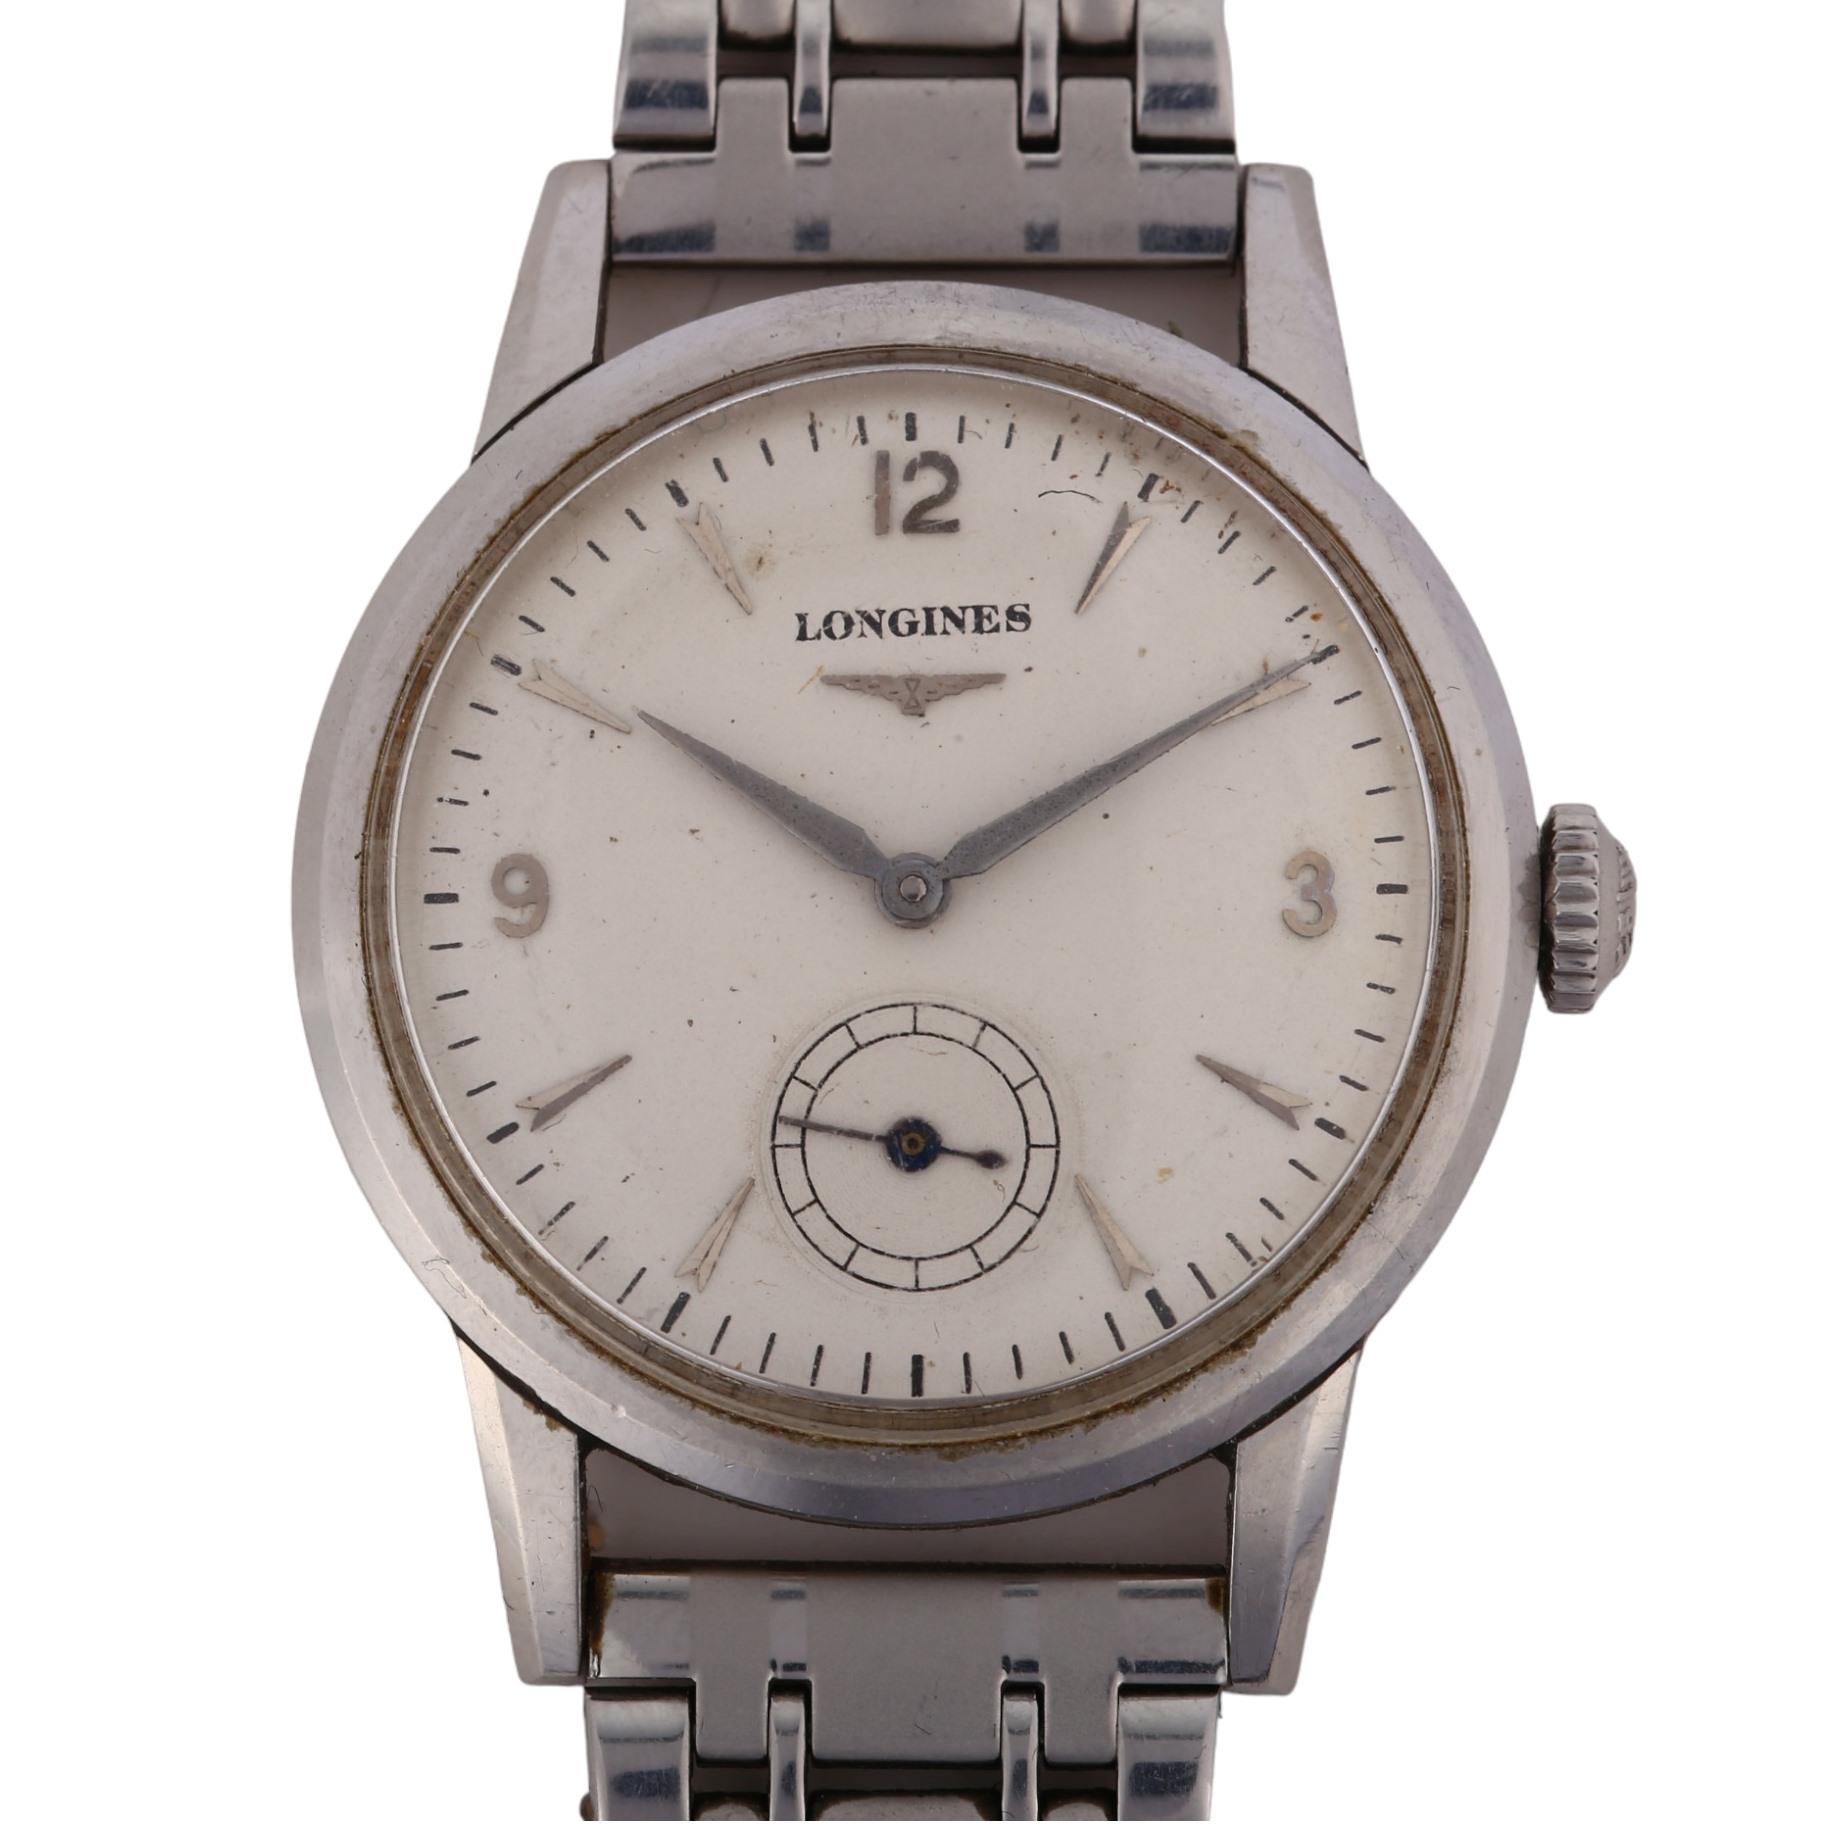 LONGINES - a Vintage stainless steel mechanical bracelet watch, circa 1960s, silvered dial with